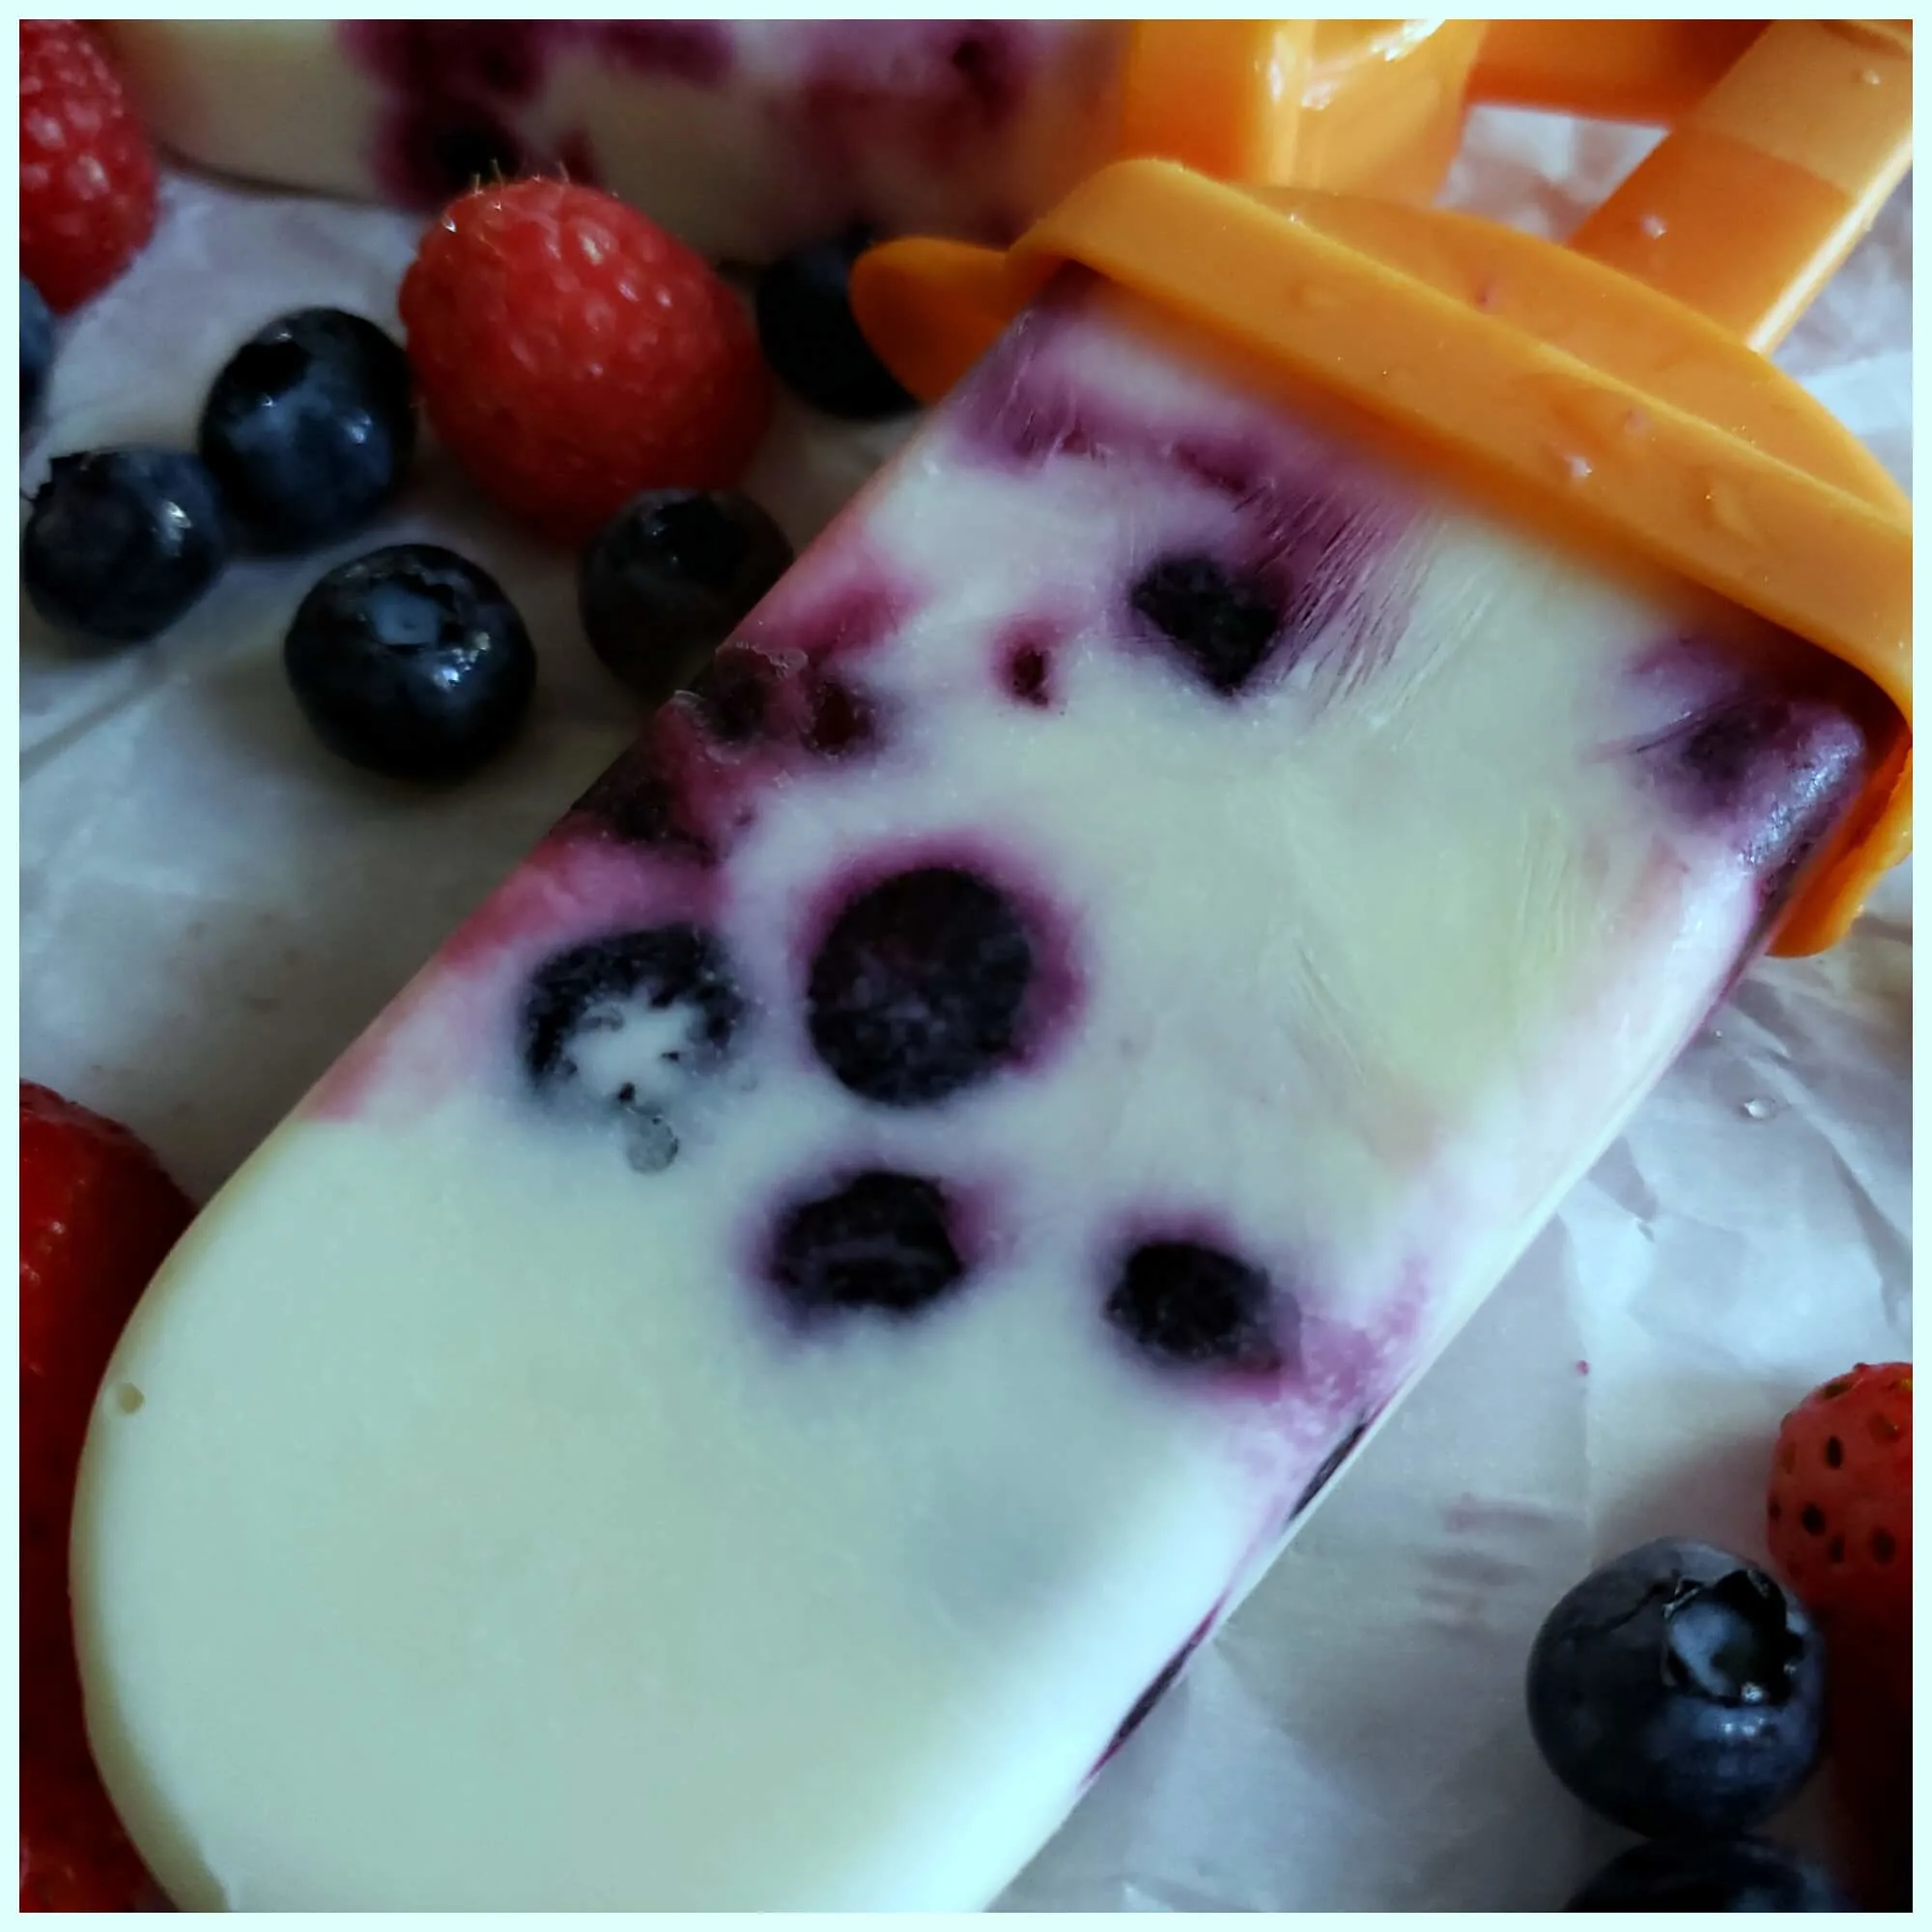 Amazing homemade ice cream popsicles made with whole milk yogurt from grass fed cows that are low in sugar and have plenty of healthy probiotics